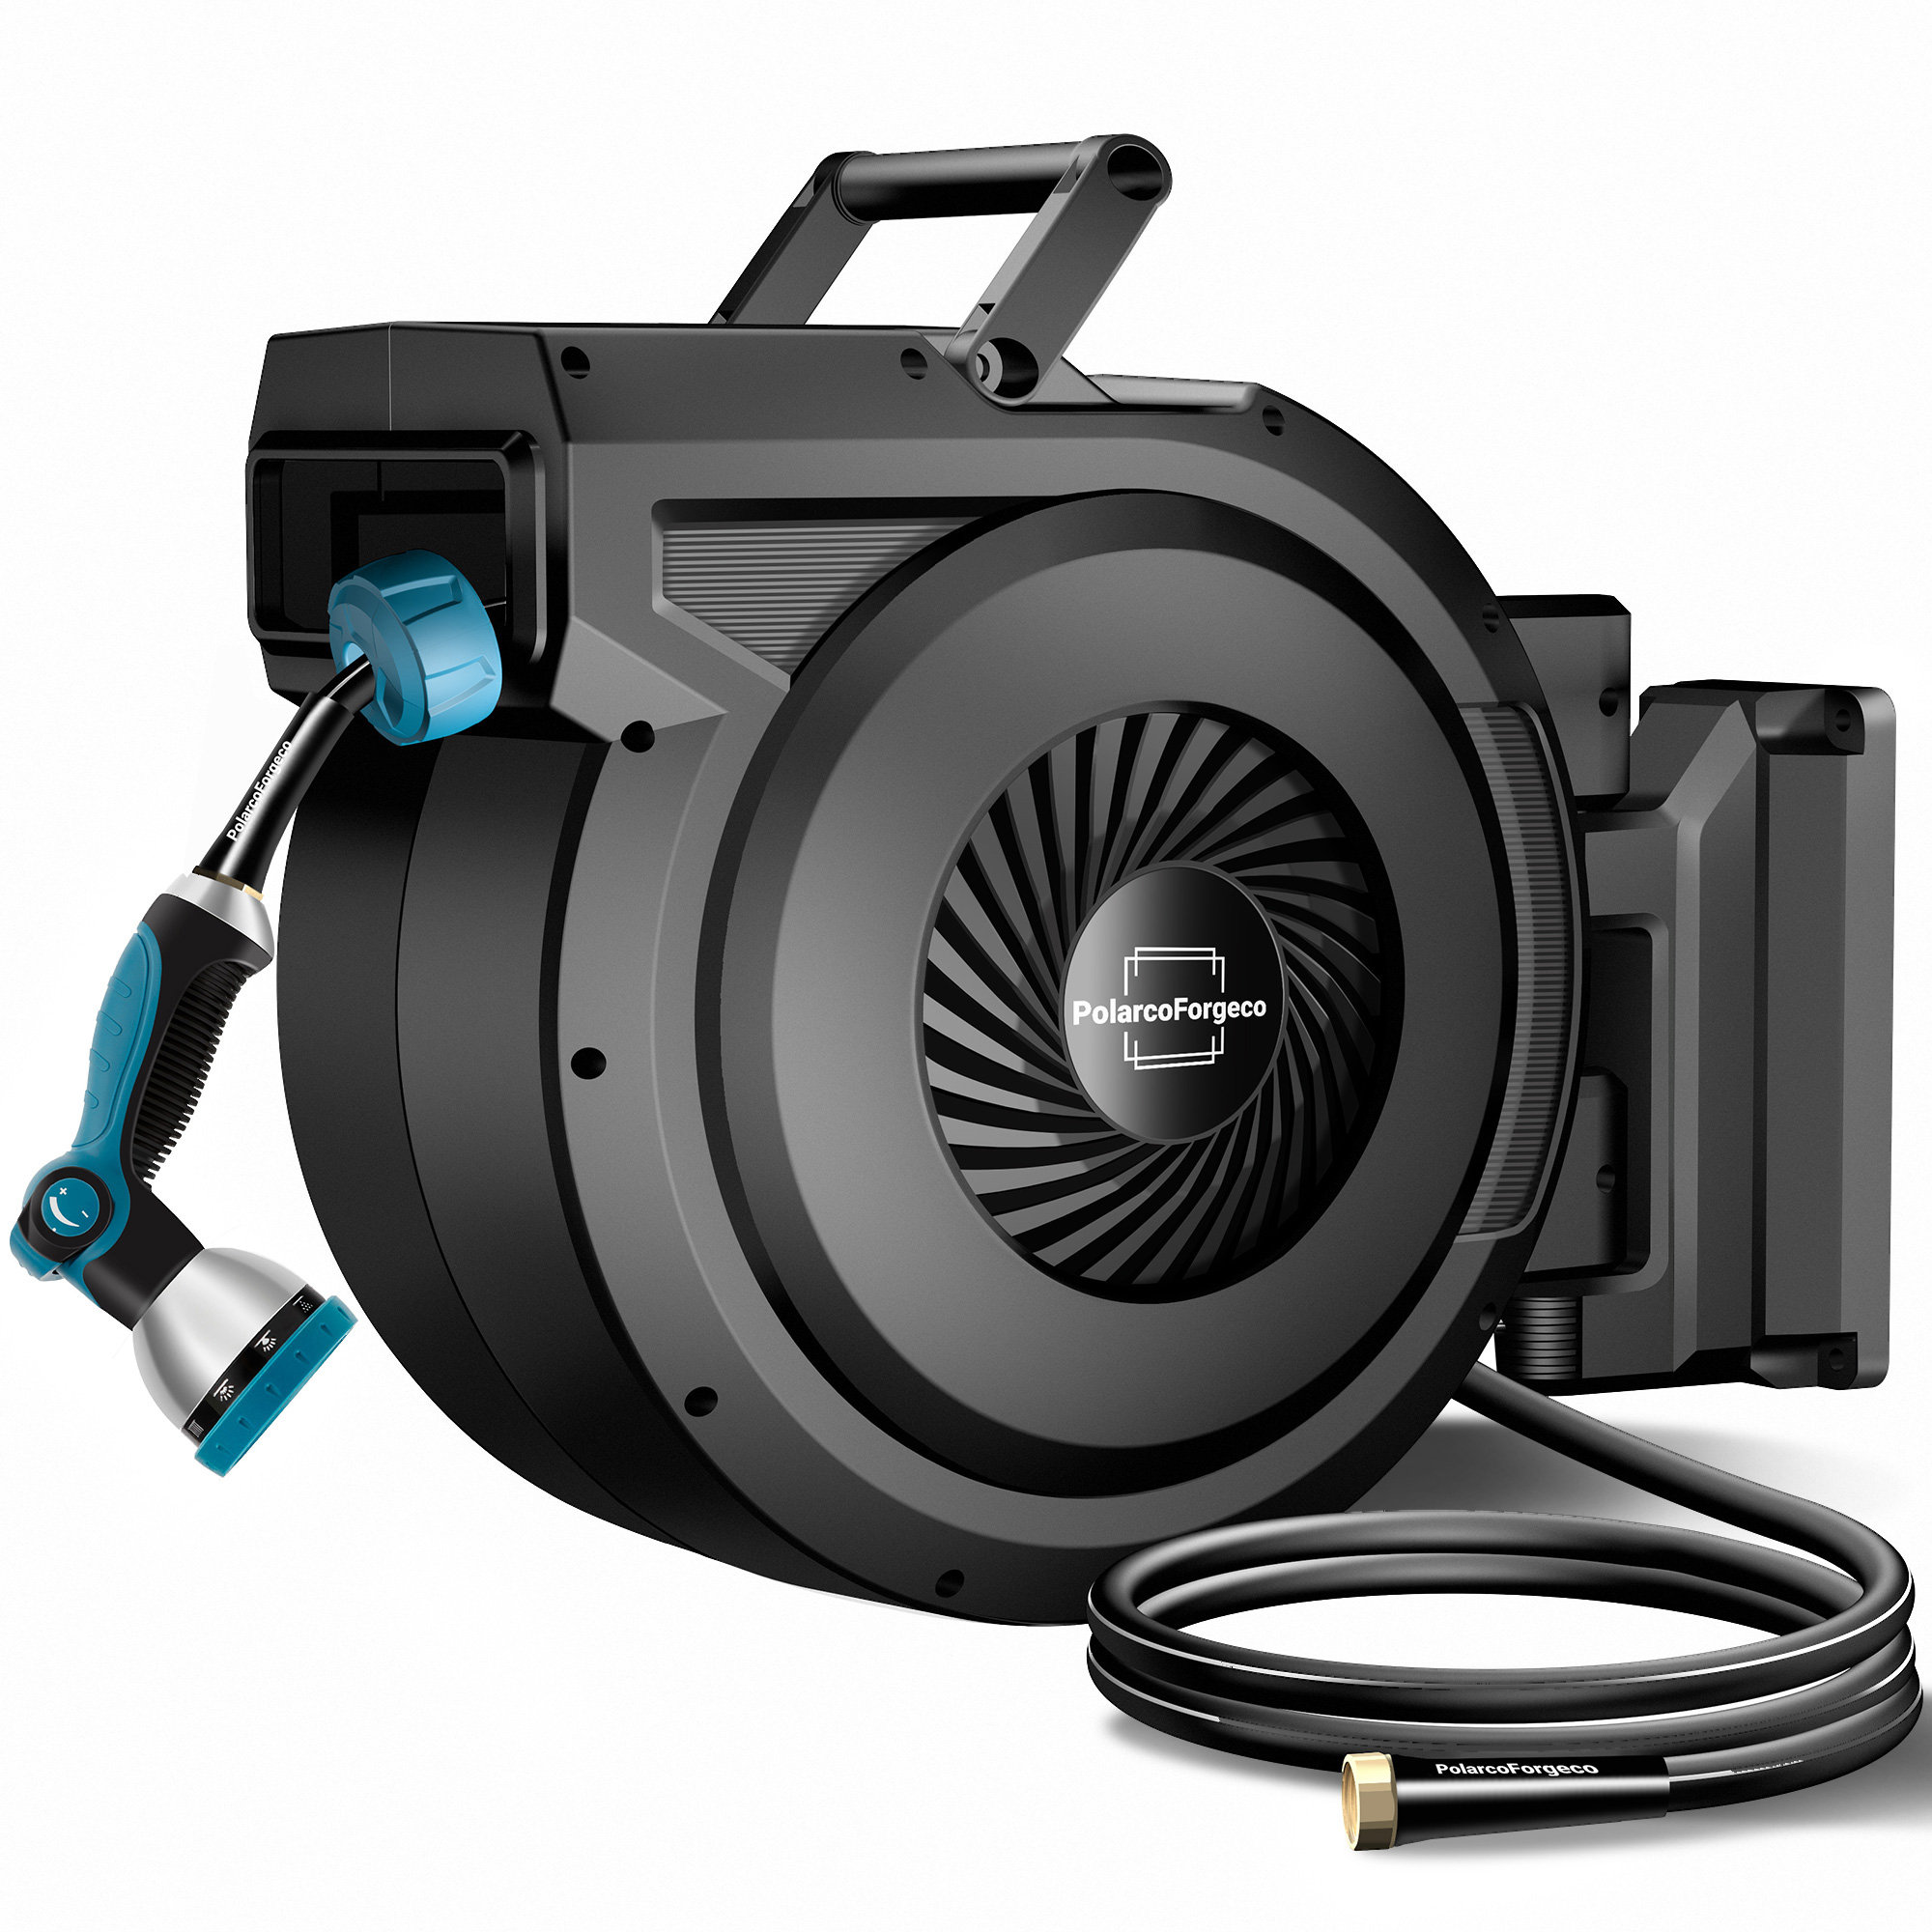 FLIZE 90 Ft Wall Mounted Automatic Retractable Hose Reel - Wayfair